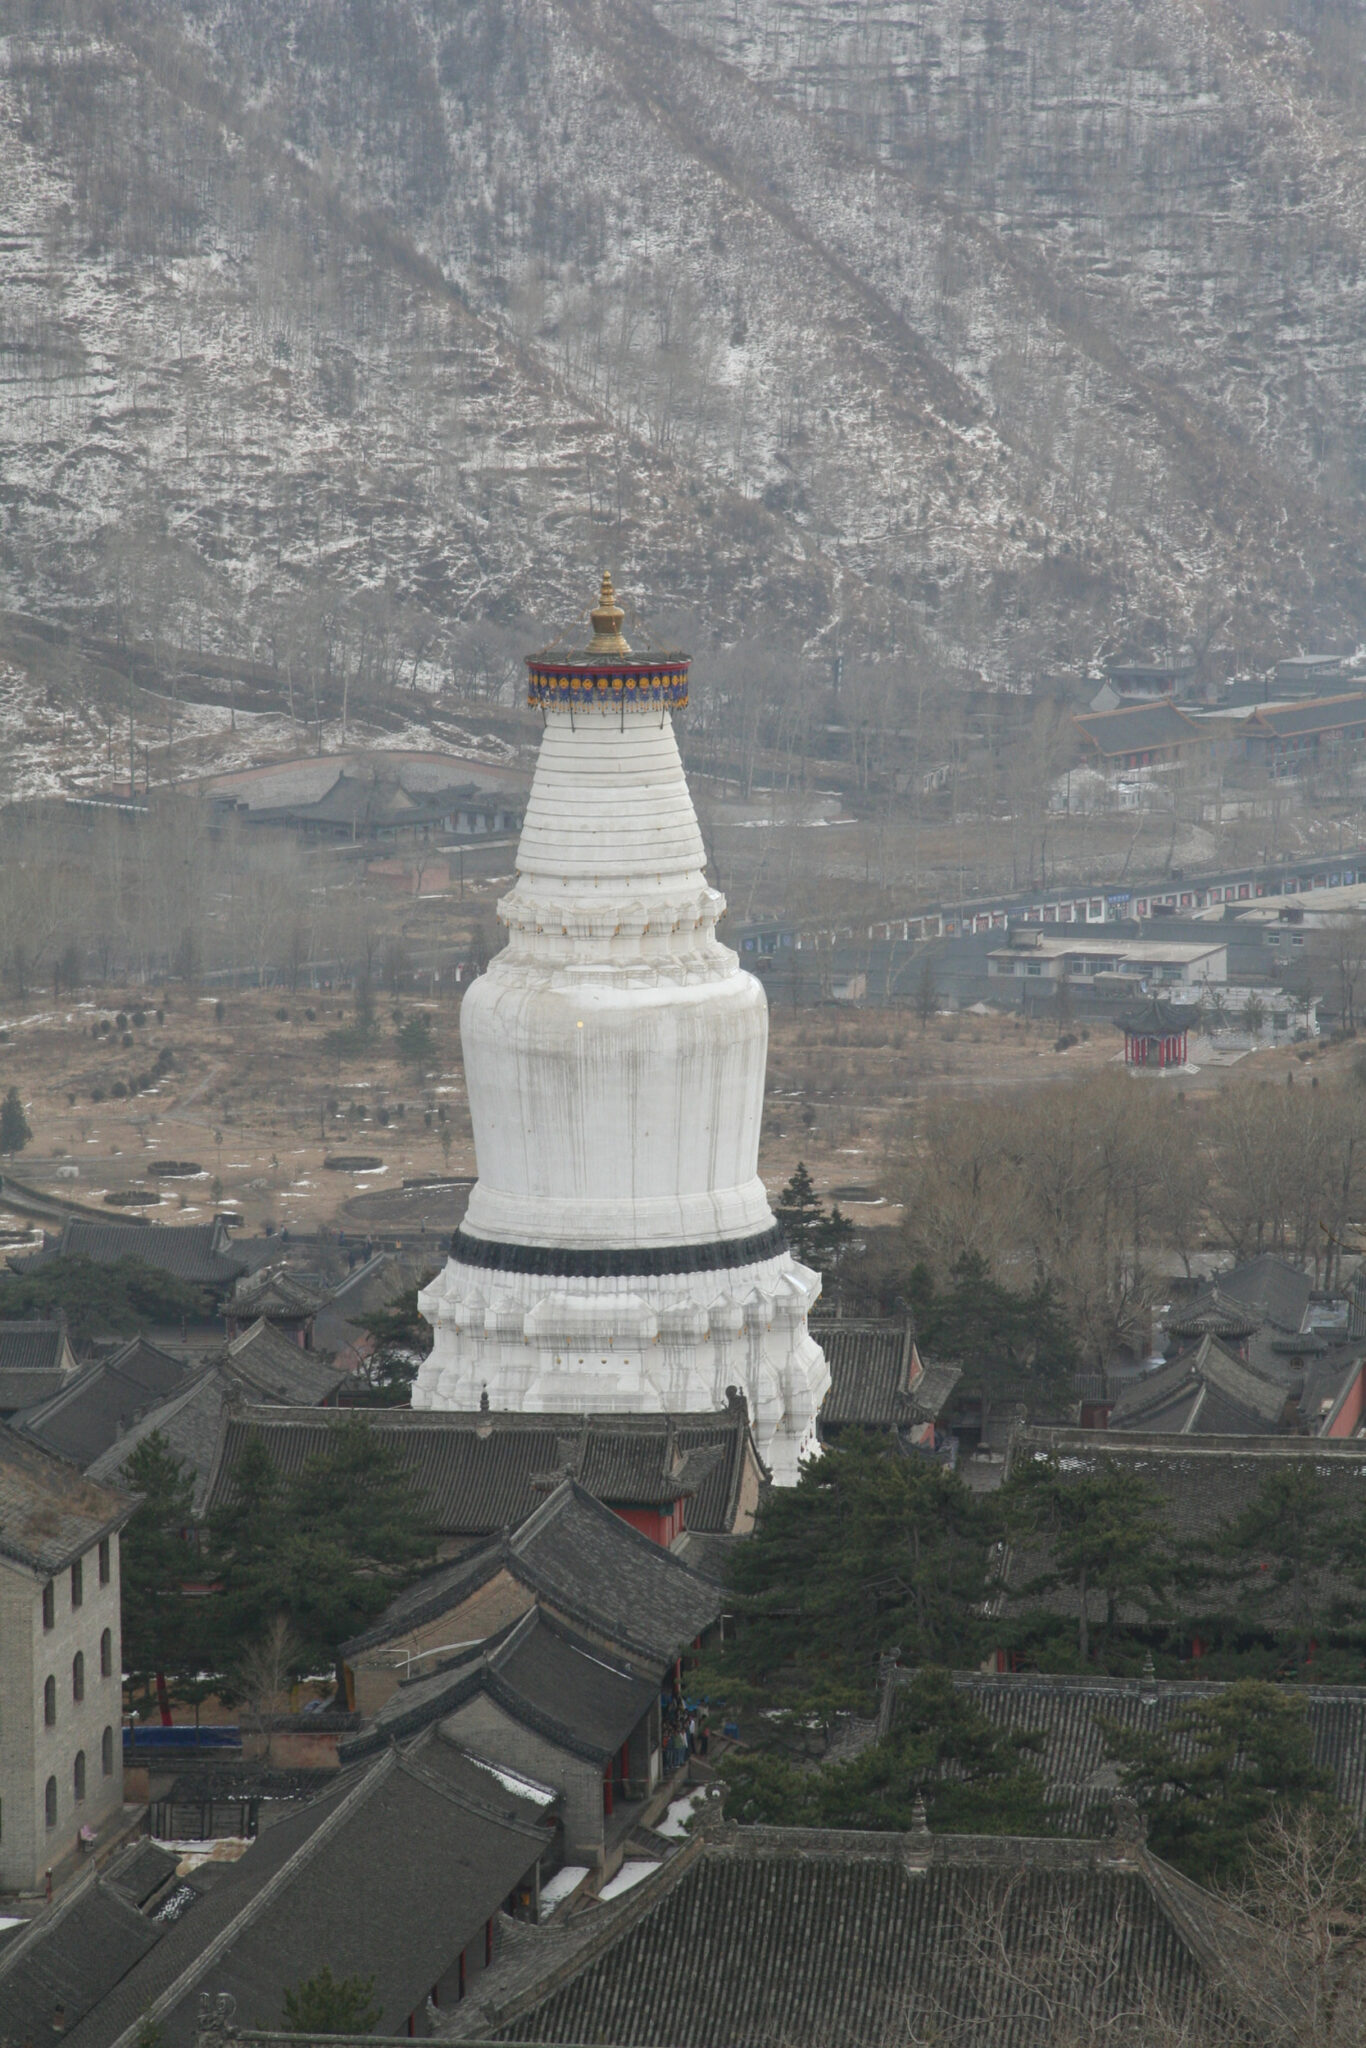 Monumental white stupa stands in sharp contrast to surrounding low-slung buildings and mountain in background